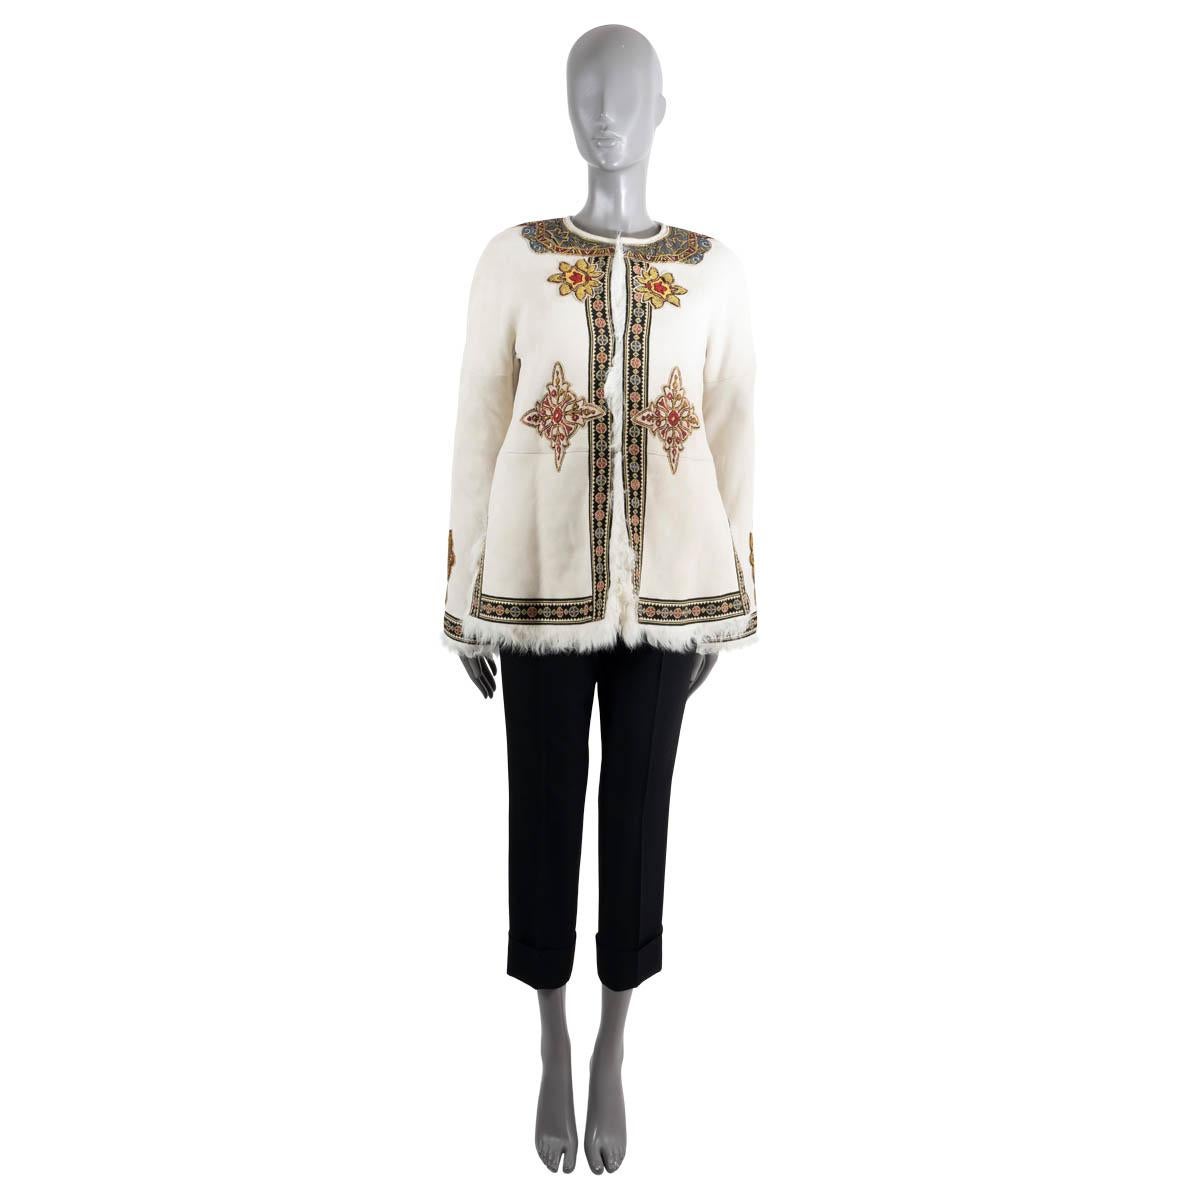 100% authentic Etro Mustang jacket in cream lambskin leather. Features ornate multicolor bohemian embroidering, round collarless neck, dropped shoulder and fur trims. Closes with concealed hook and eye closure on the front and and is fully lined in